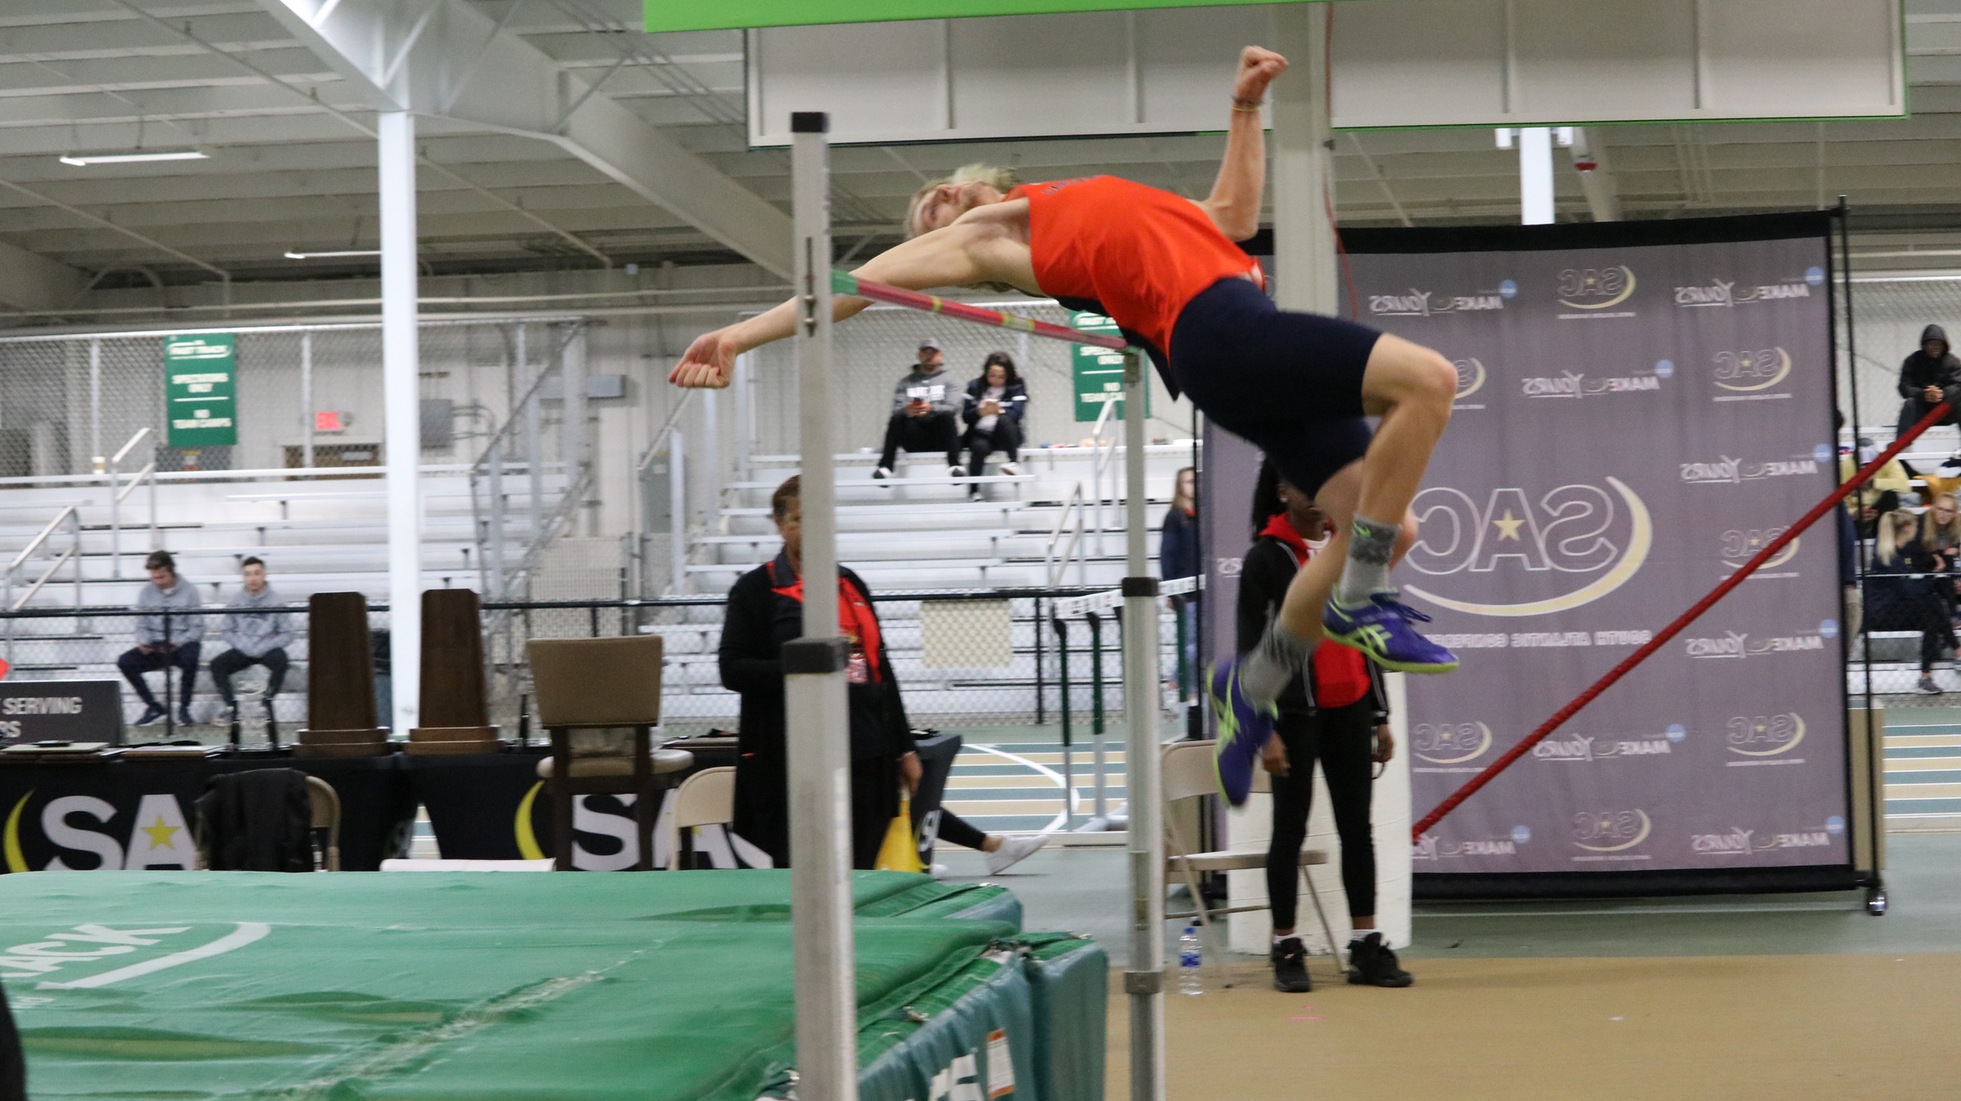 Eagles earn fourth across both divisions at SAC Indoor Track and Field Championships